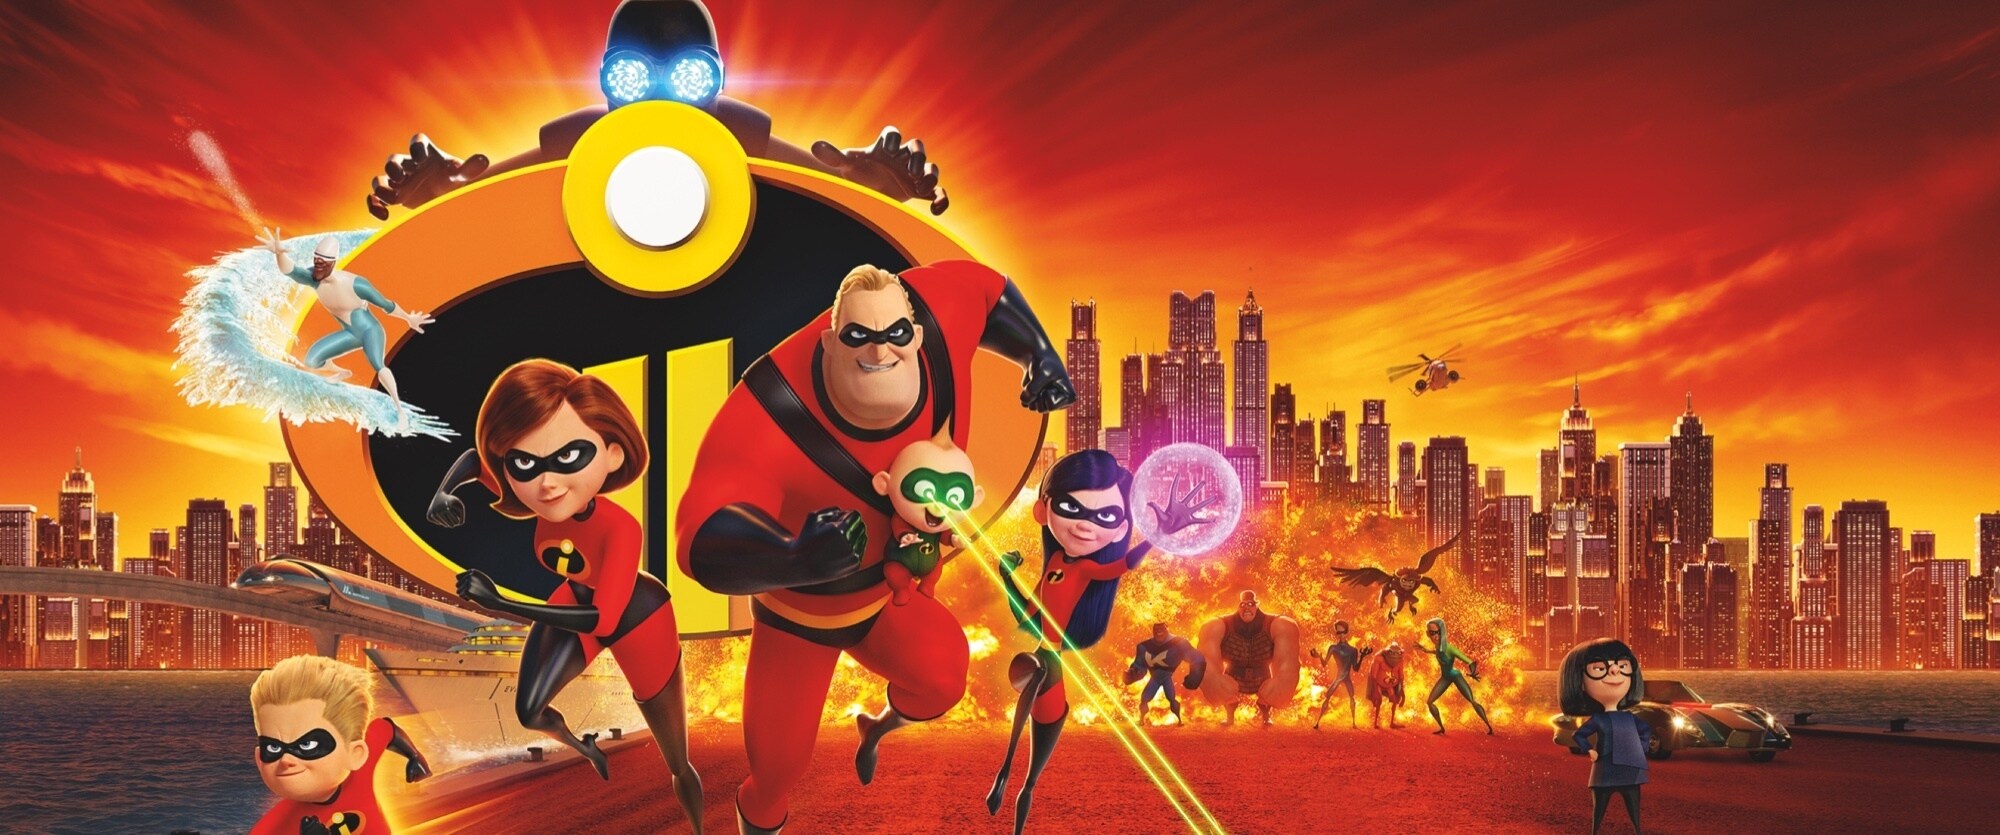 The Incredibles 2 | Trailer